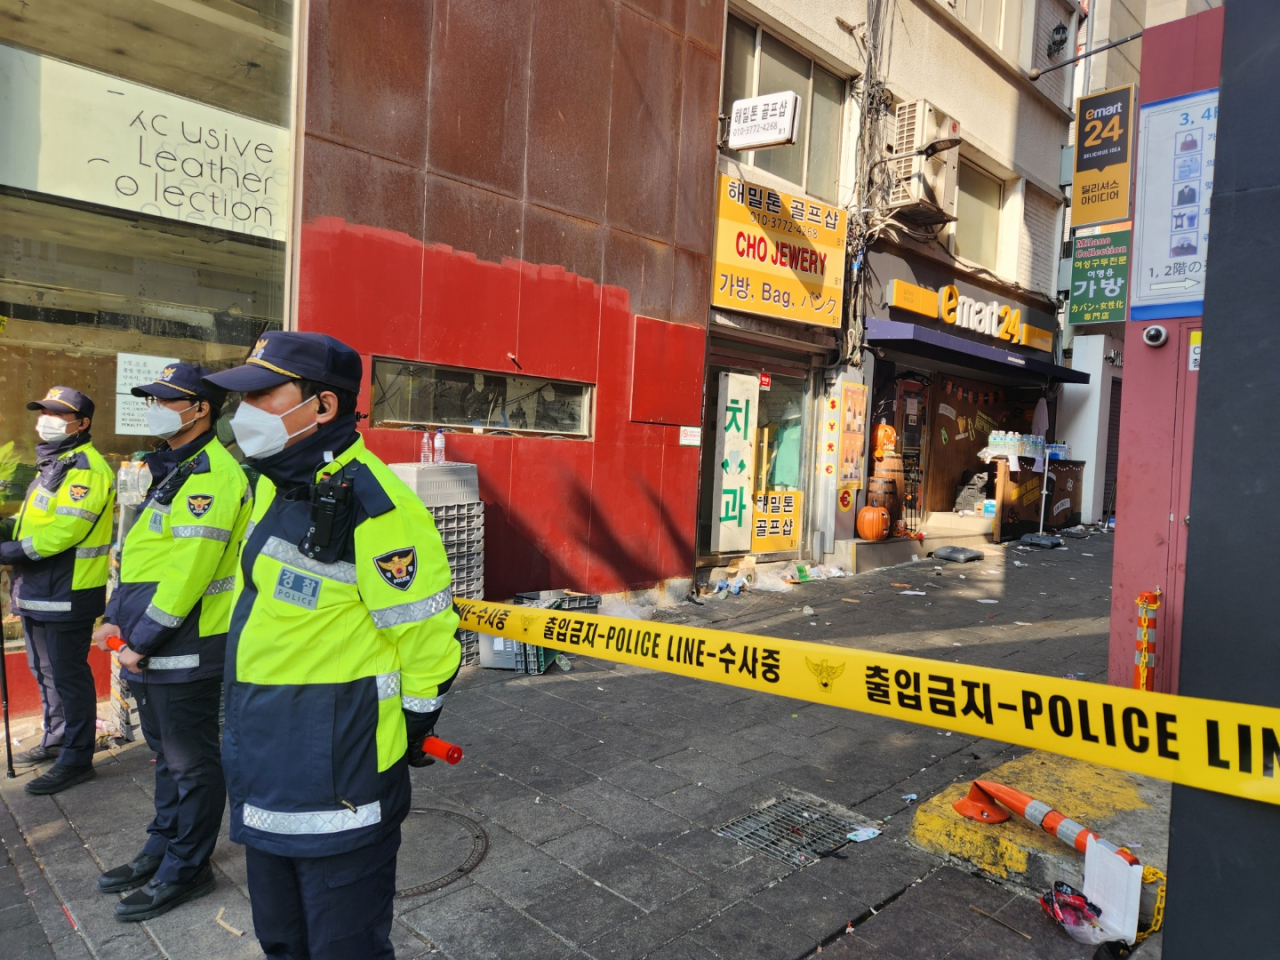 An accident area is restricted by police in Itaewon, central Seoul on Sunday. (Choi Jae-hee/The Korea Herald)